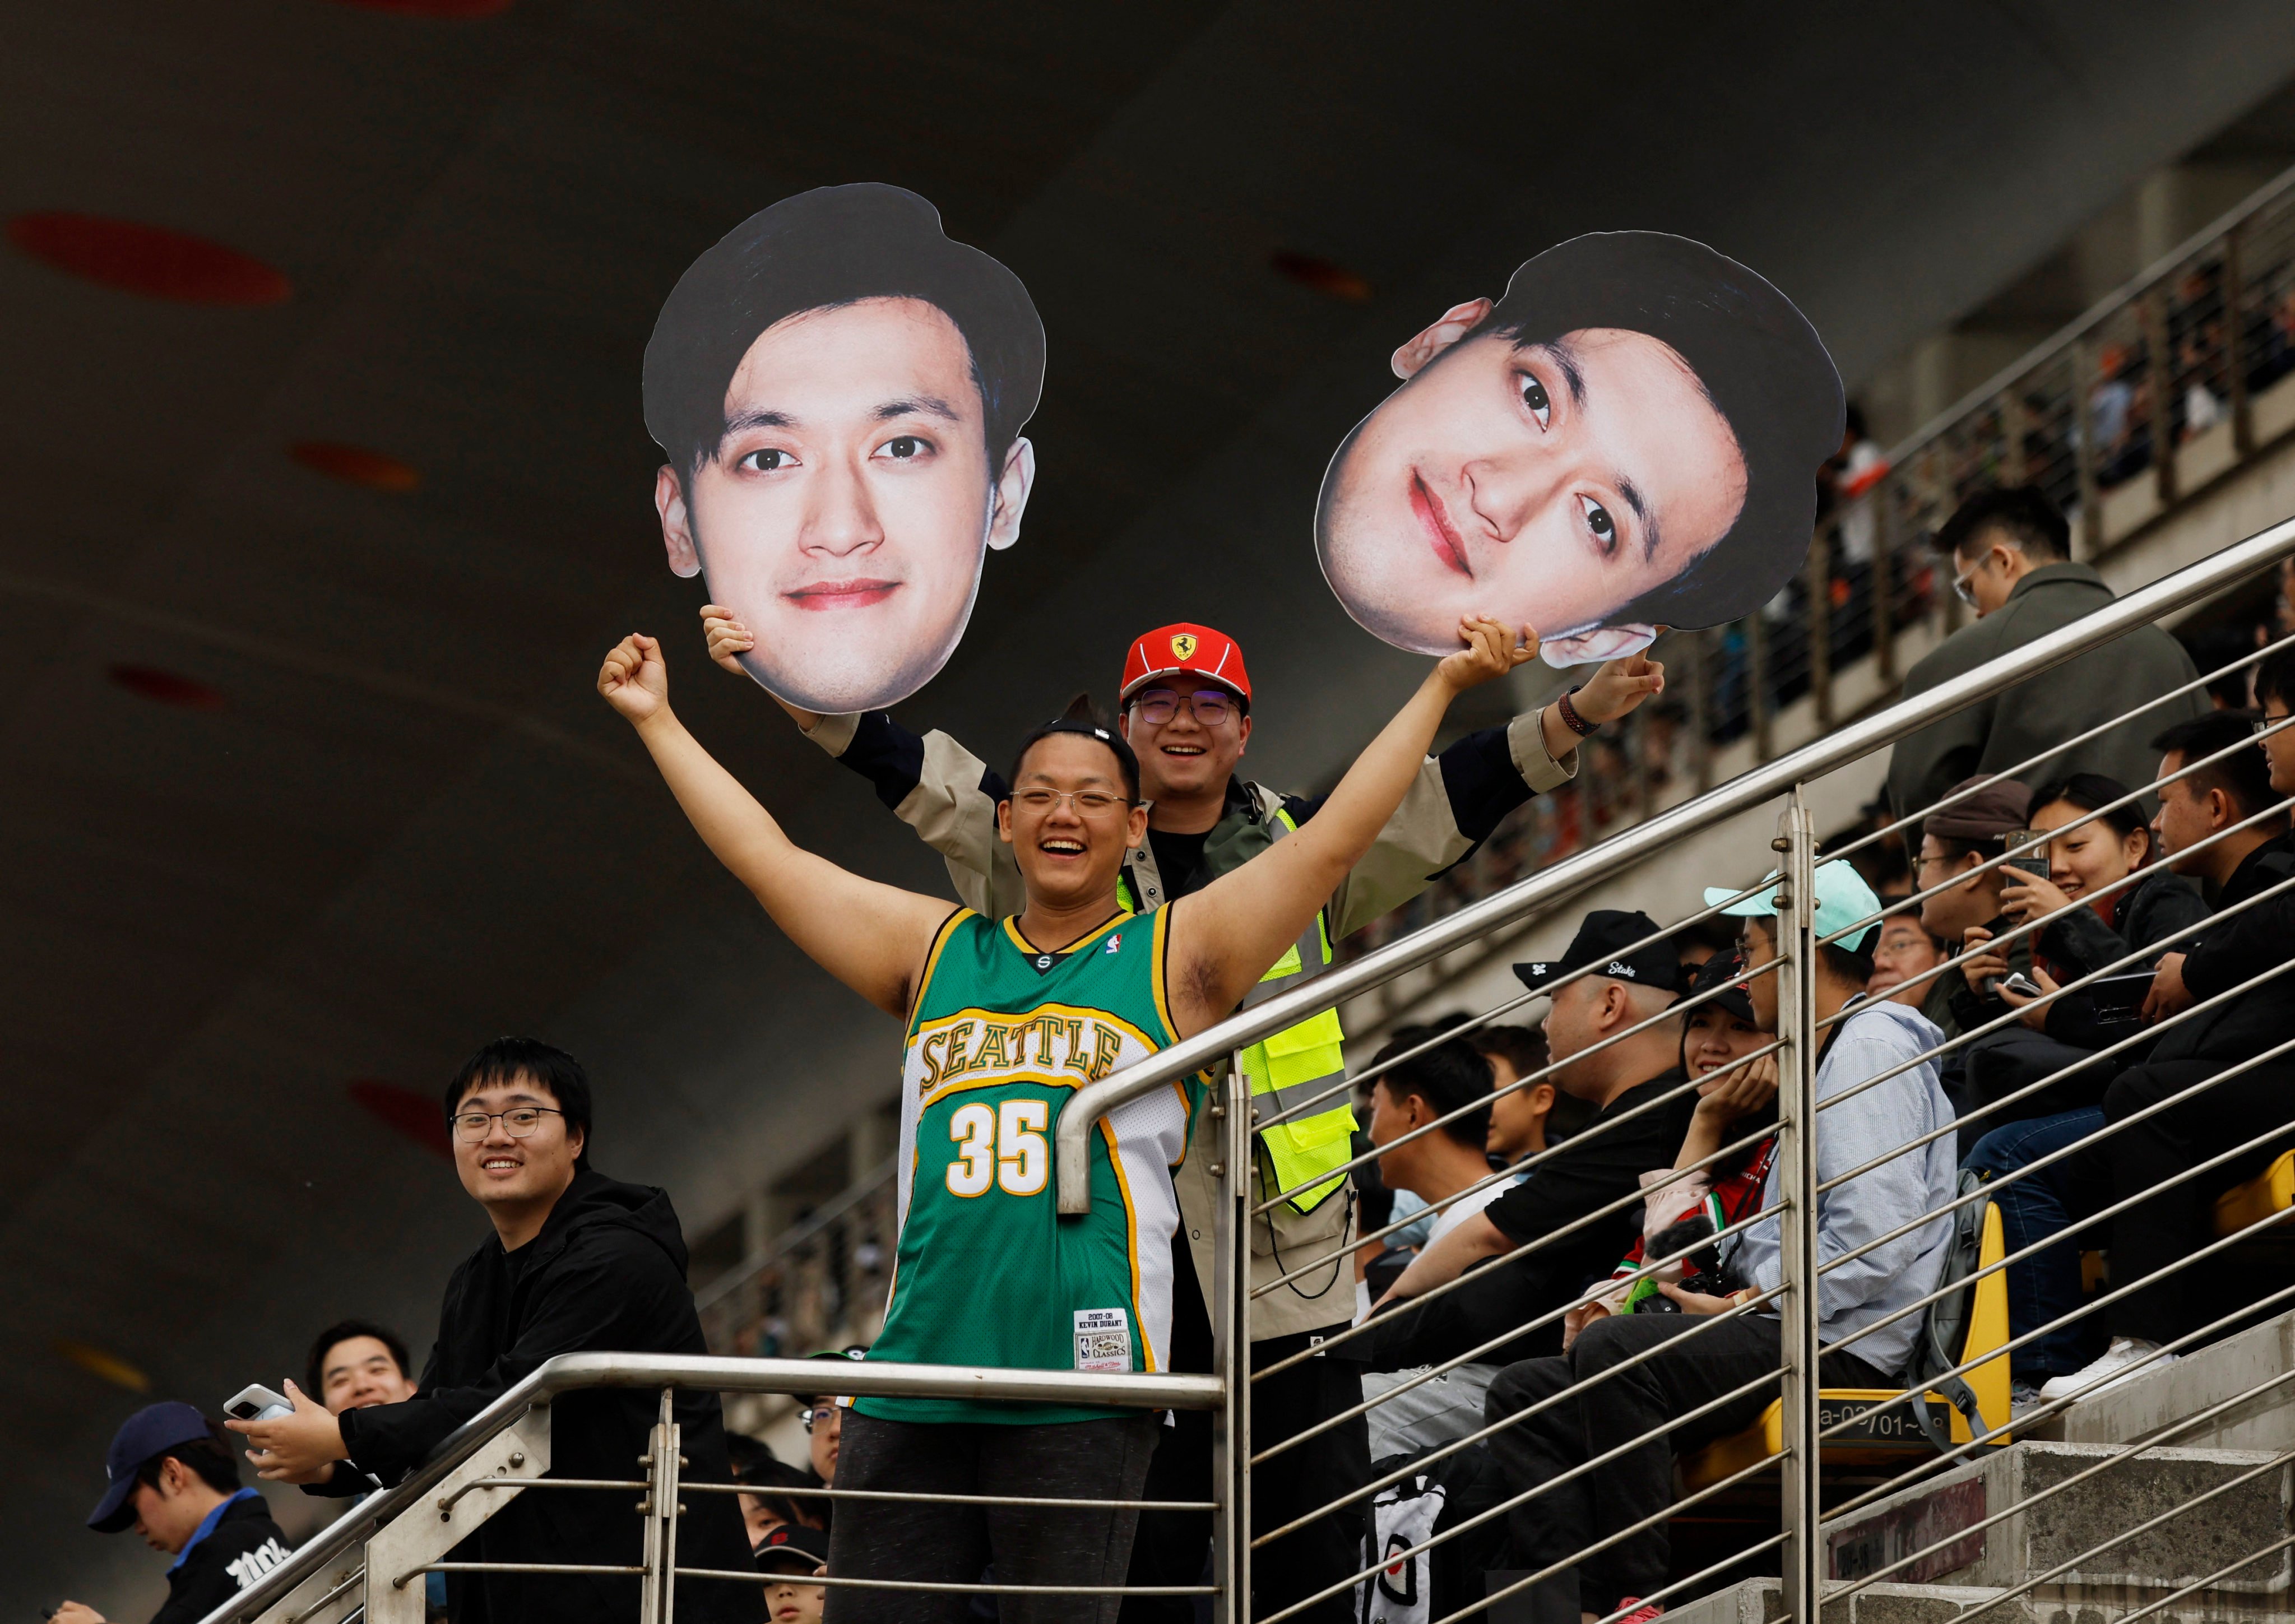 Fans in the stands hold up a cut-out of Sauber’s hometown hope Guanyu Zhou during the sprint qualifying session of the Chinese Grand Prix. Photo: Reuters